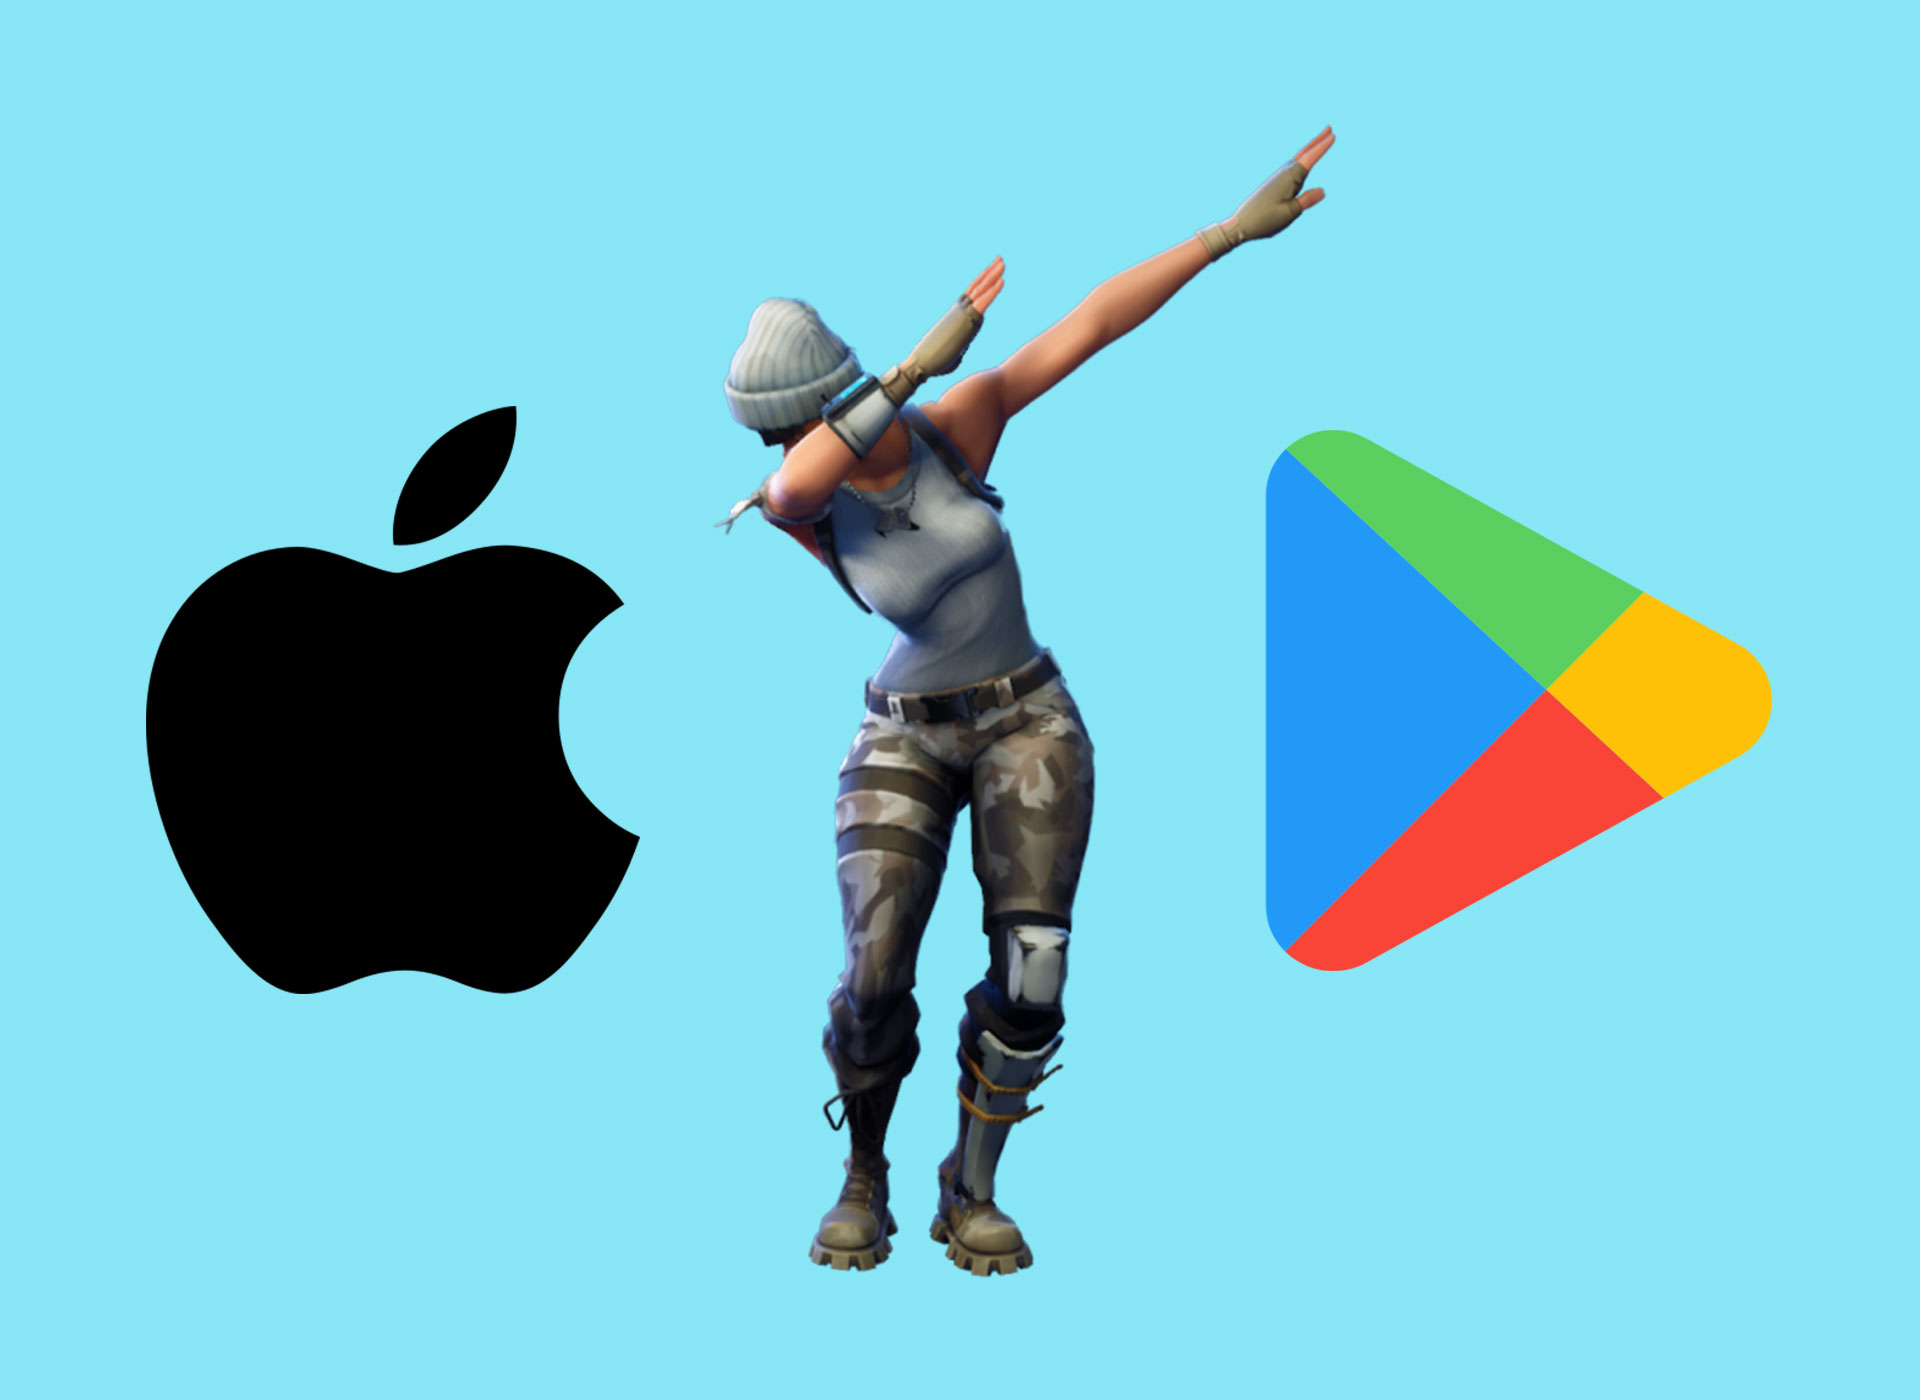 App Fortnite Tower Apple Losing Fortnite Won T Hurt Apple S Revenues But The Publicity Will Sting